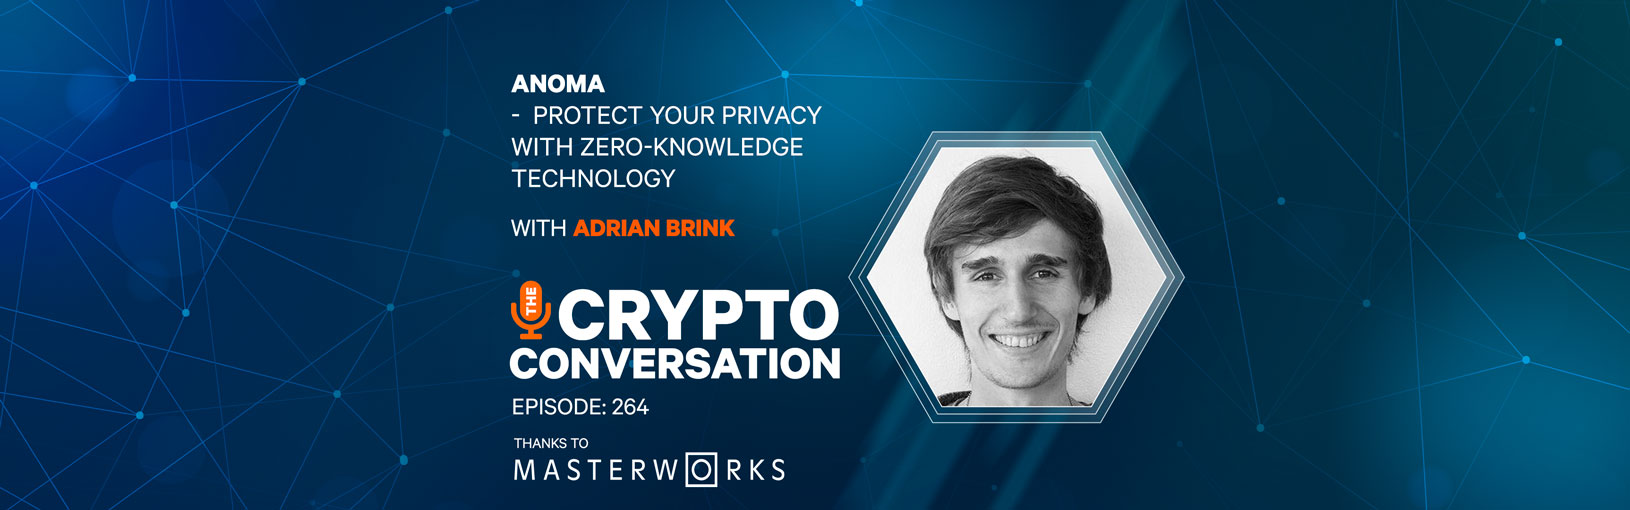 Anoma – Protect your privacy with zero-knowledge technology